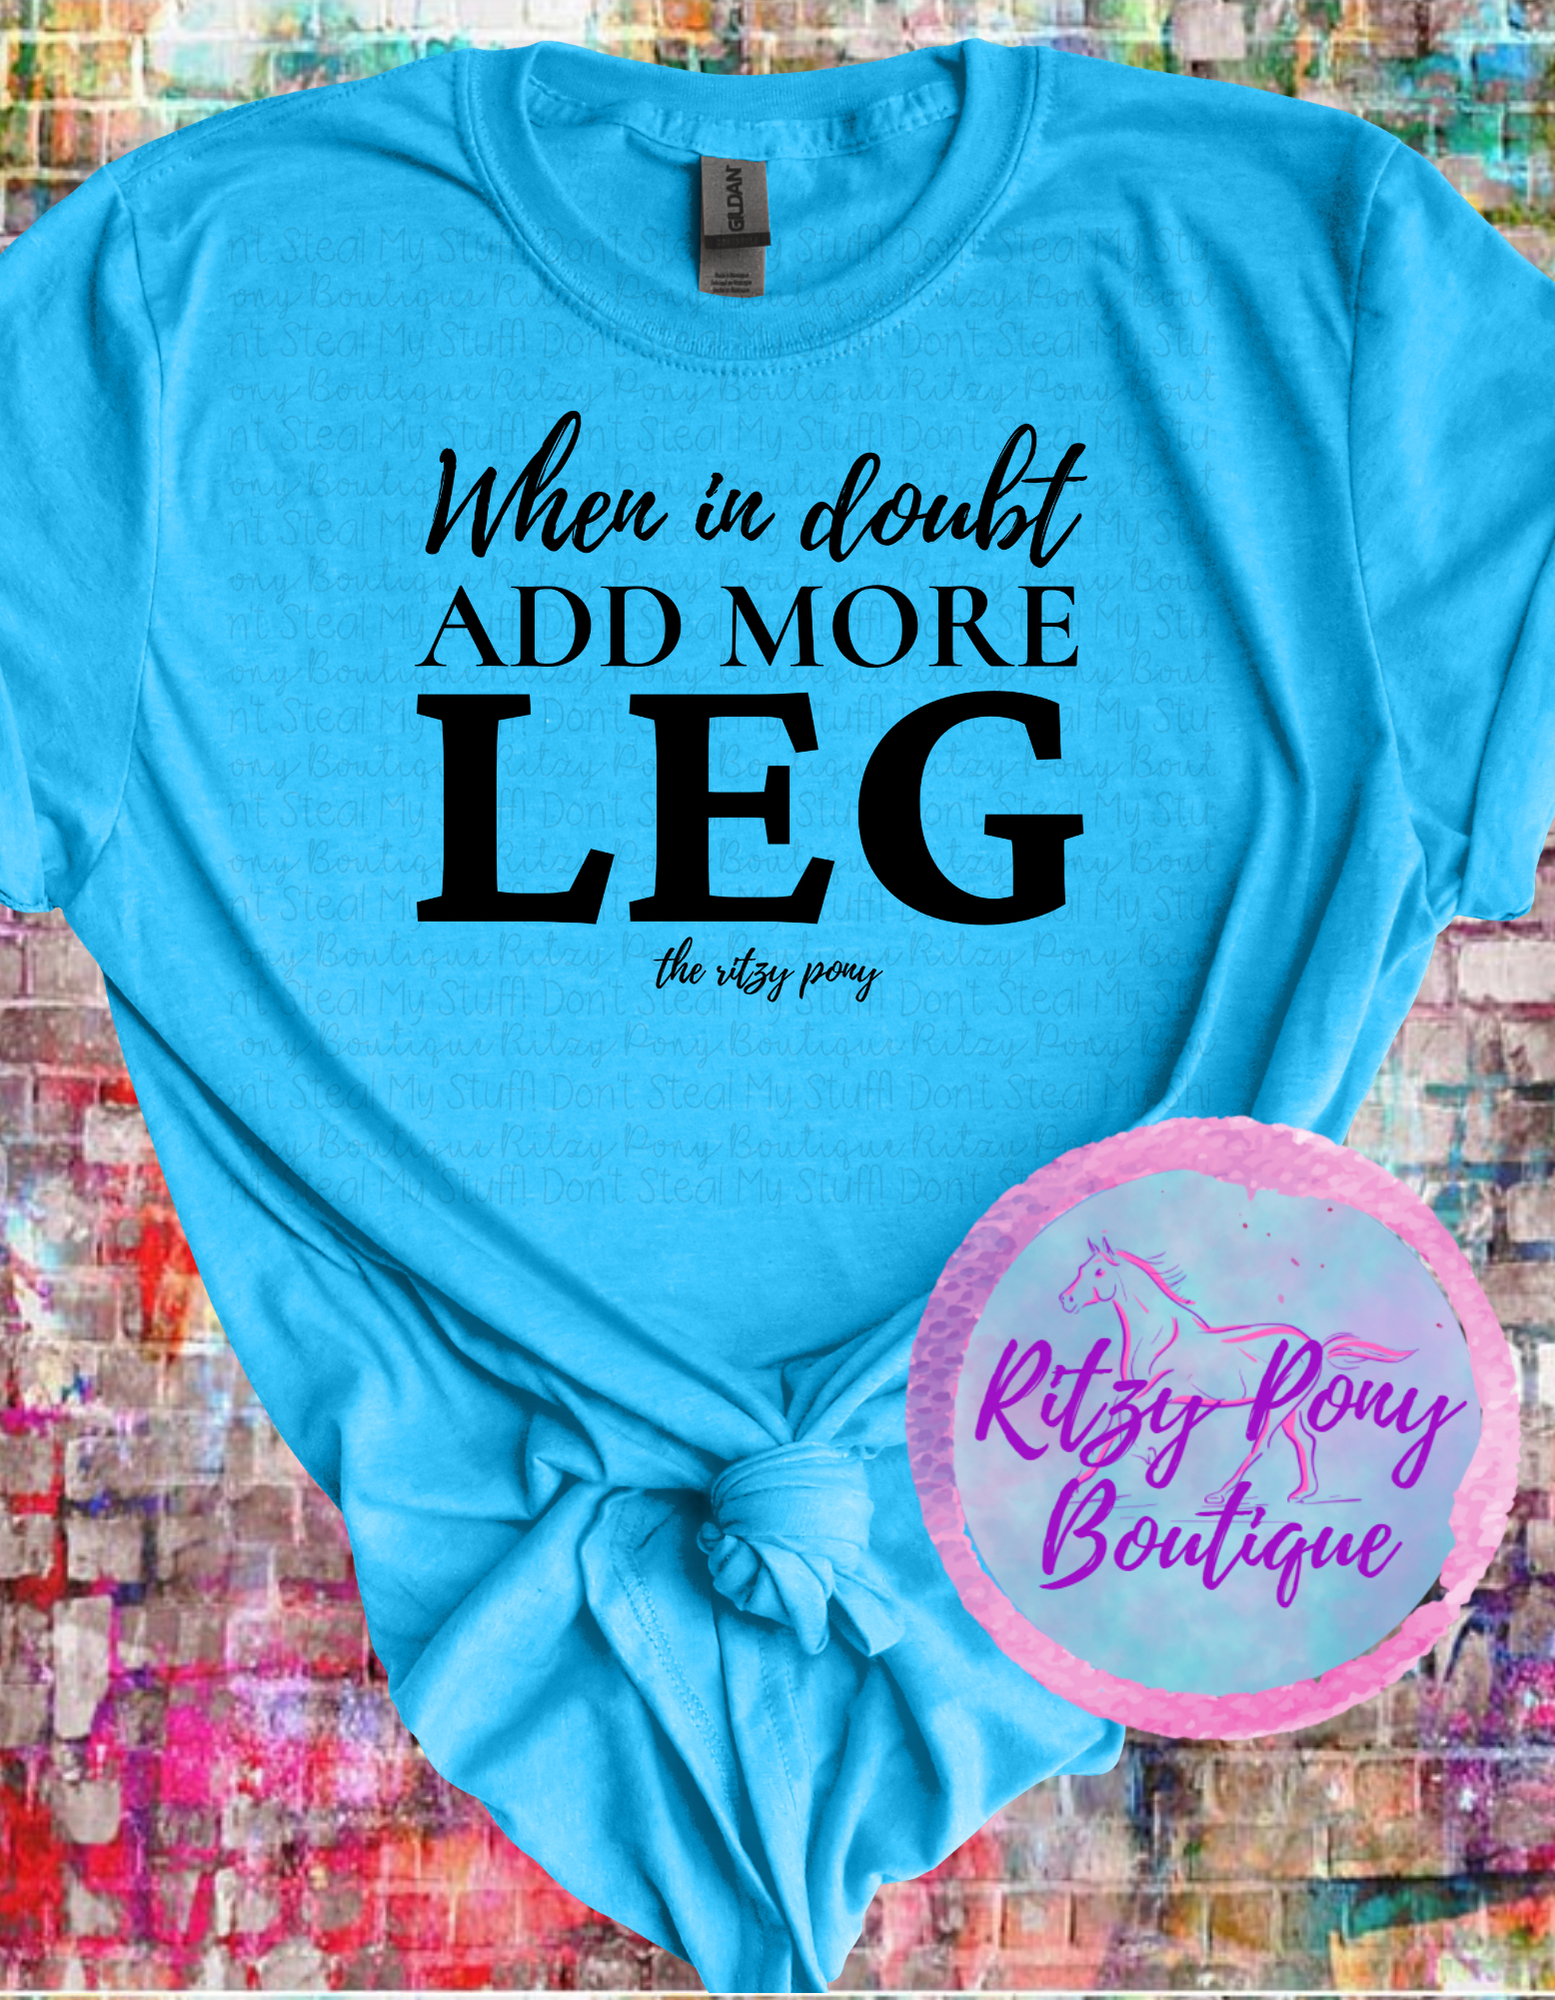 When in doubt ADD MORE LEG T-Shirt - The Ritzy Pony Boutique